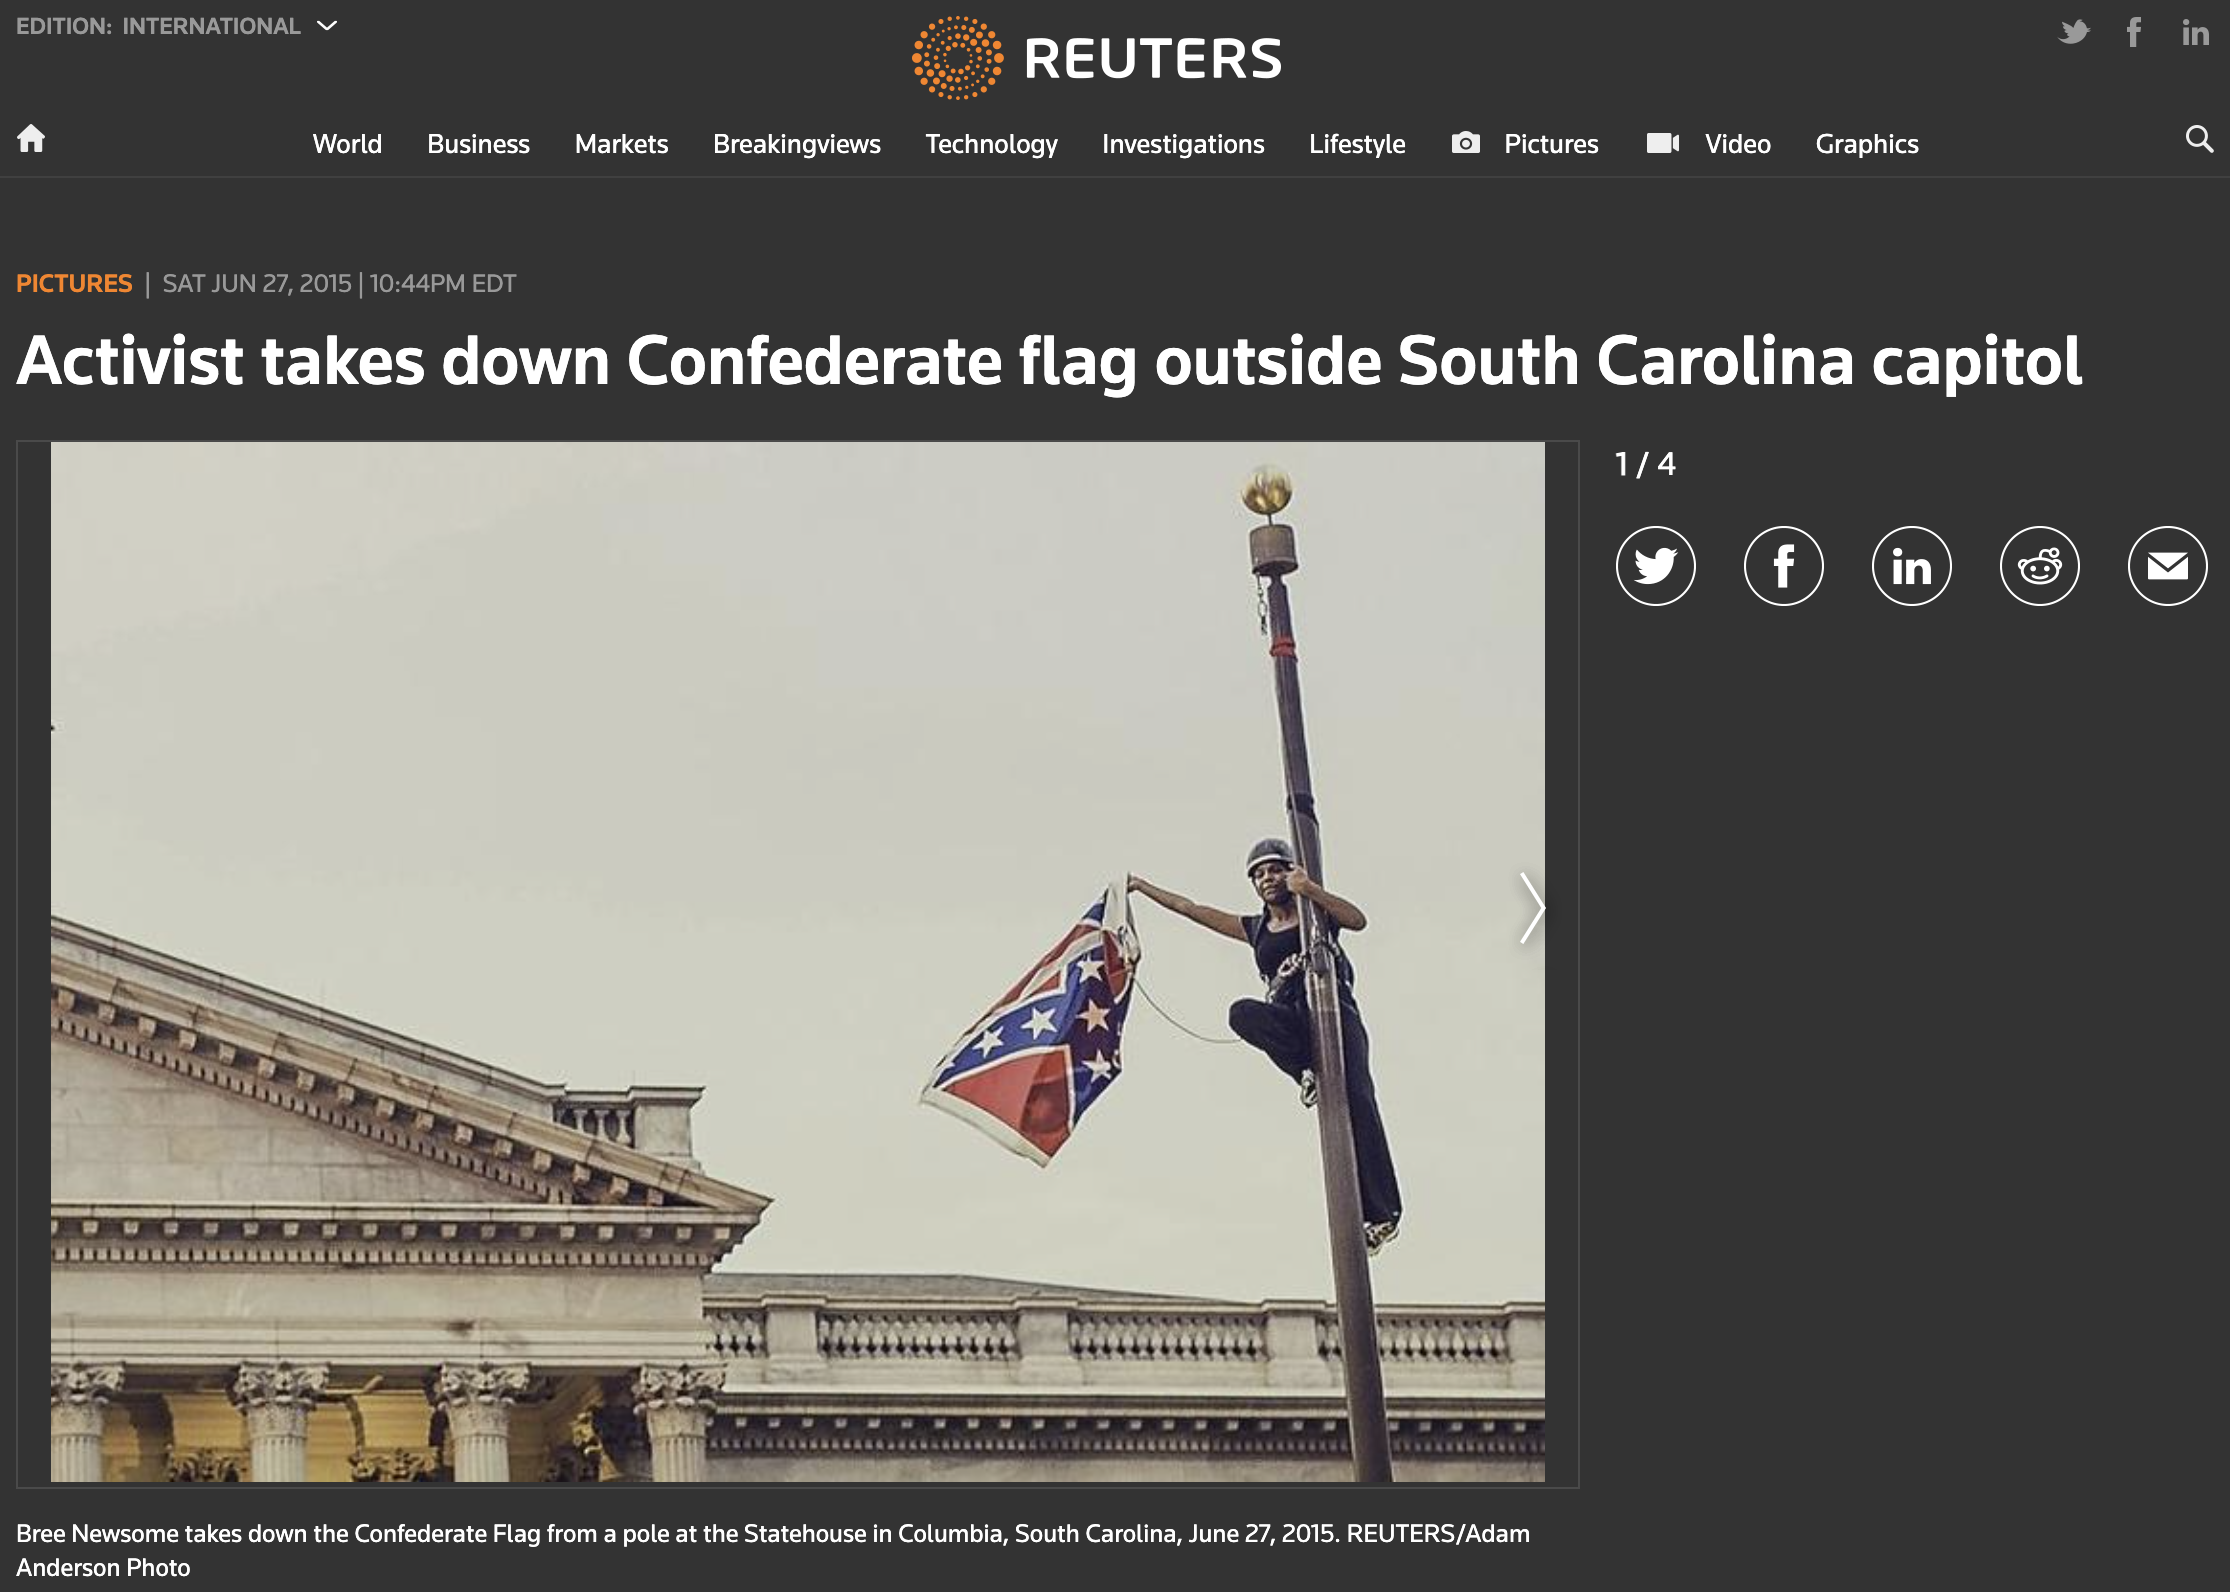 Bree Newsome with flag. "Activist takes down Confederate flag outside South Carolina capitol," <em>Reuters</em>, June 27, 2015 (photo: <a href="https://www.reuters.com/news/picture/activist-takes-down-confederate-flag-out-idUSKBN0P70MJ20150628" target="_blank" rel="noopener">Reuters/Adam Anderson Photo</a>)